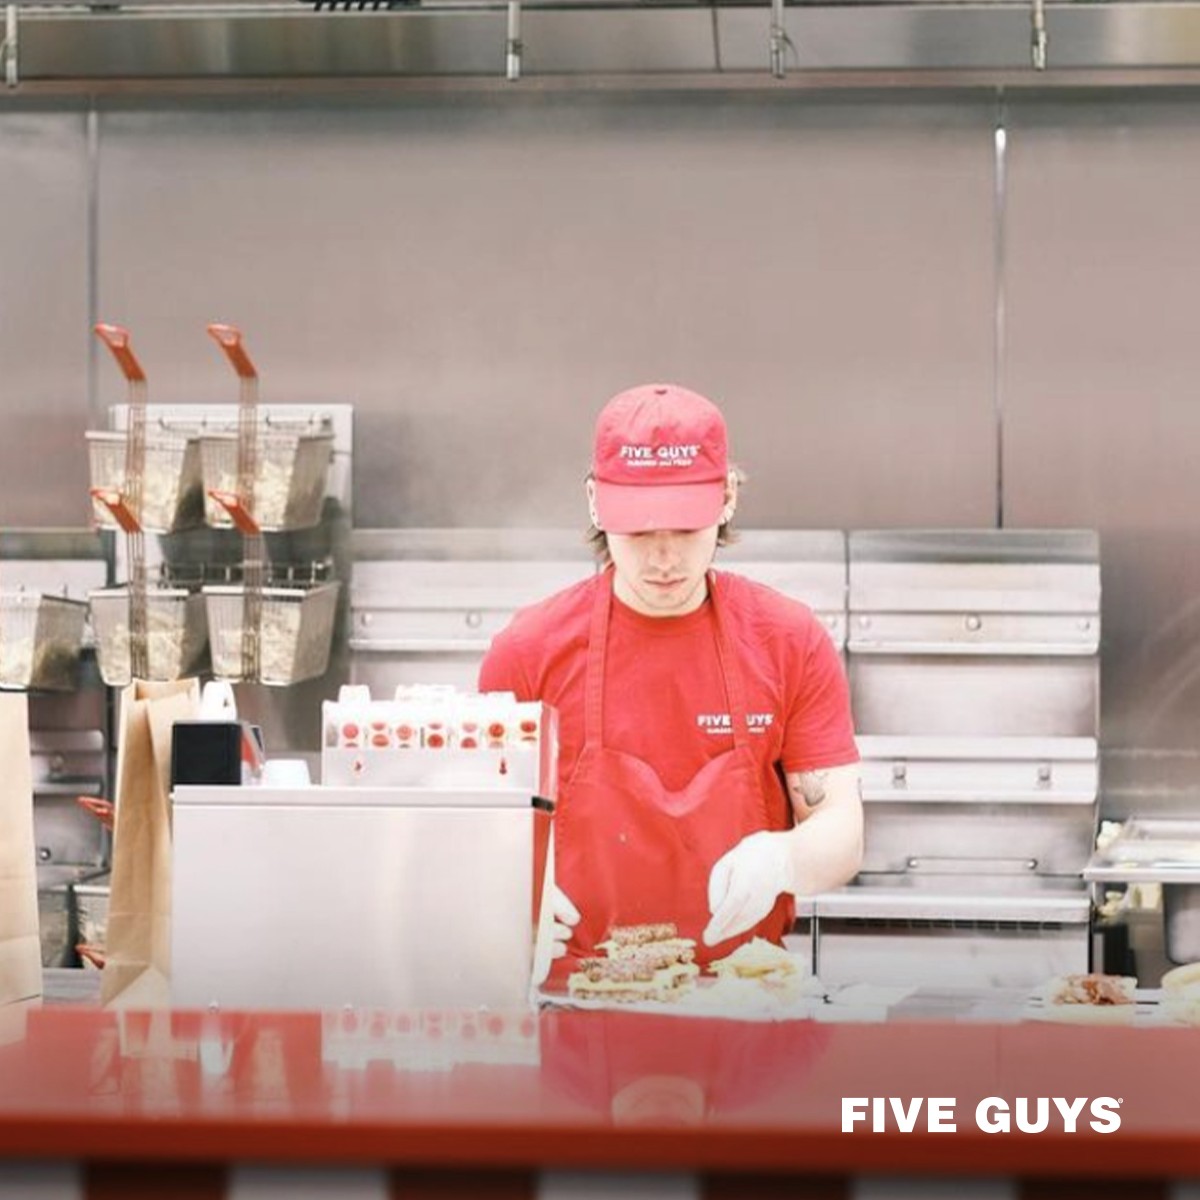 Five guys worker making burgers at a Five Guys Fundraiser